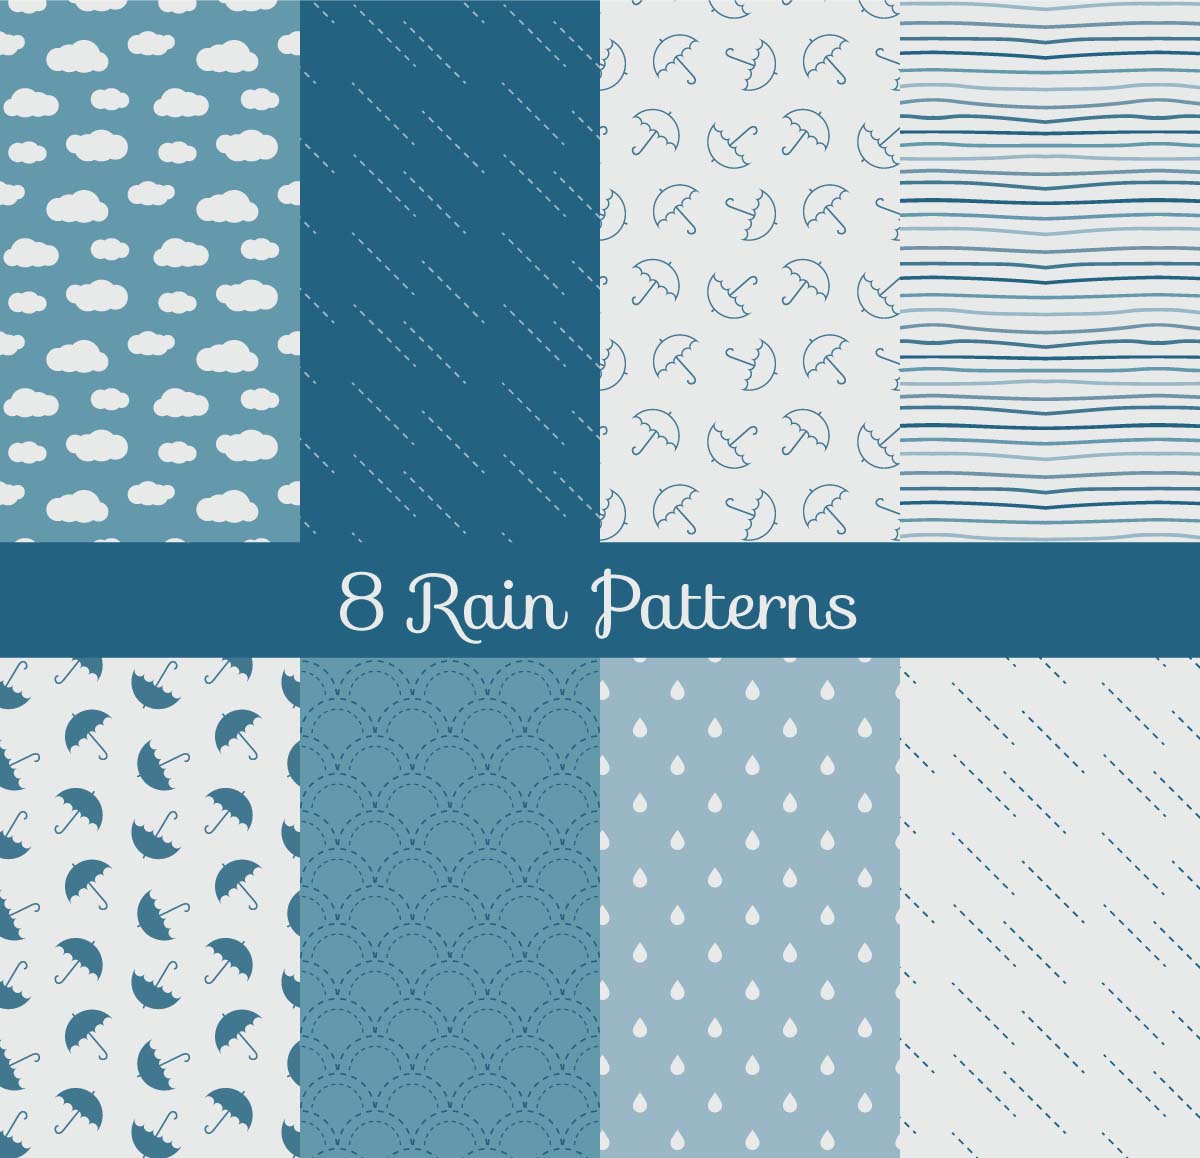 Rain and clouds patterns set vector